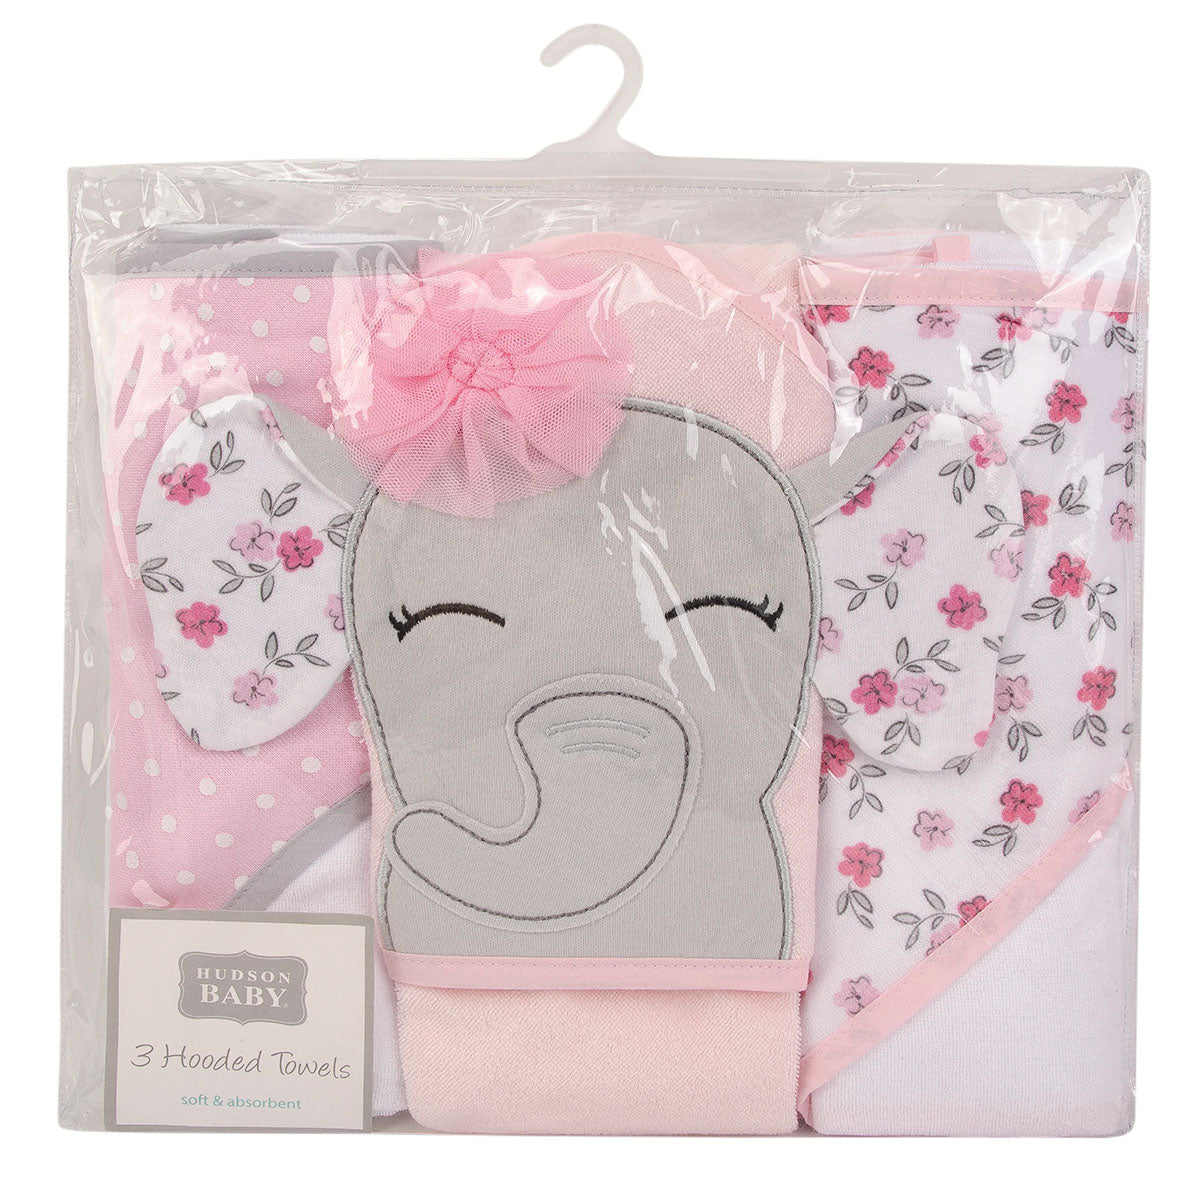 Hudson Baby - Knit Terry Hooded Towel 3pc - Floral Pretty Elephant